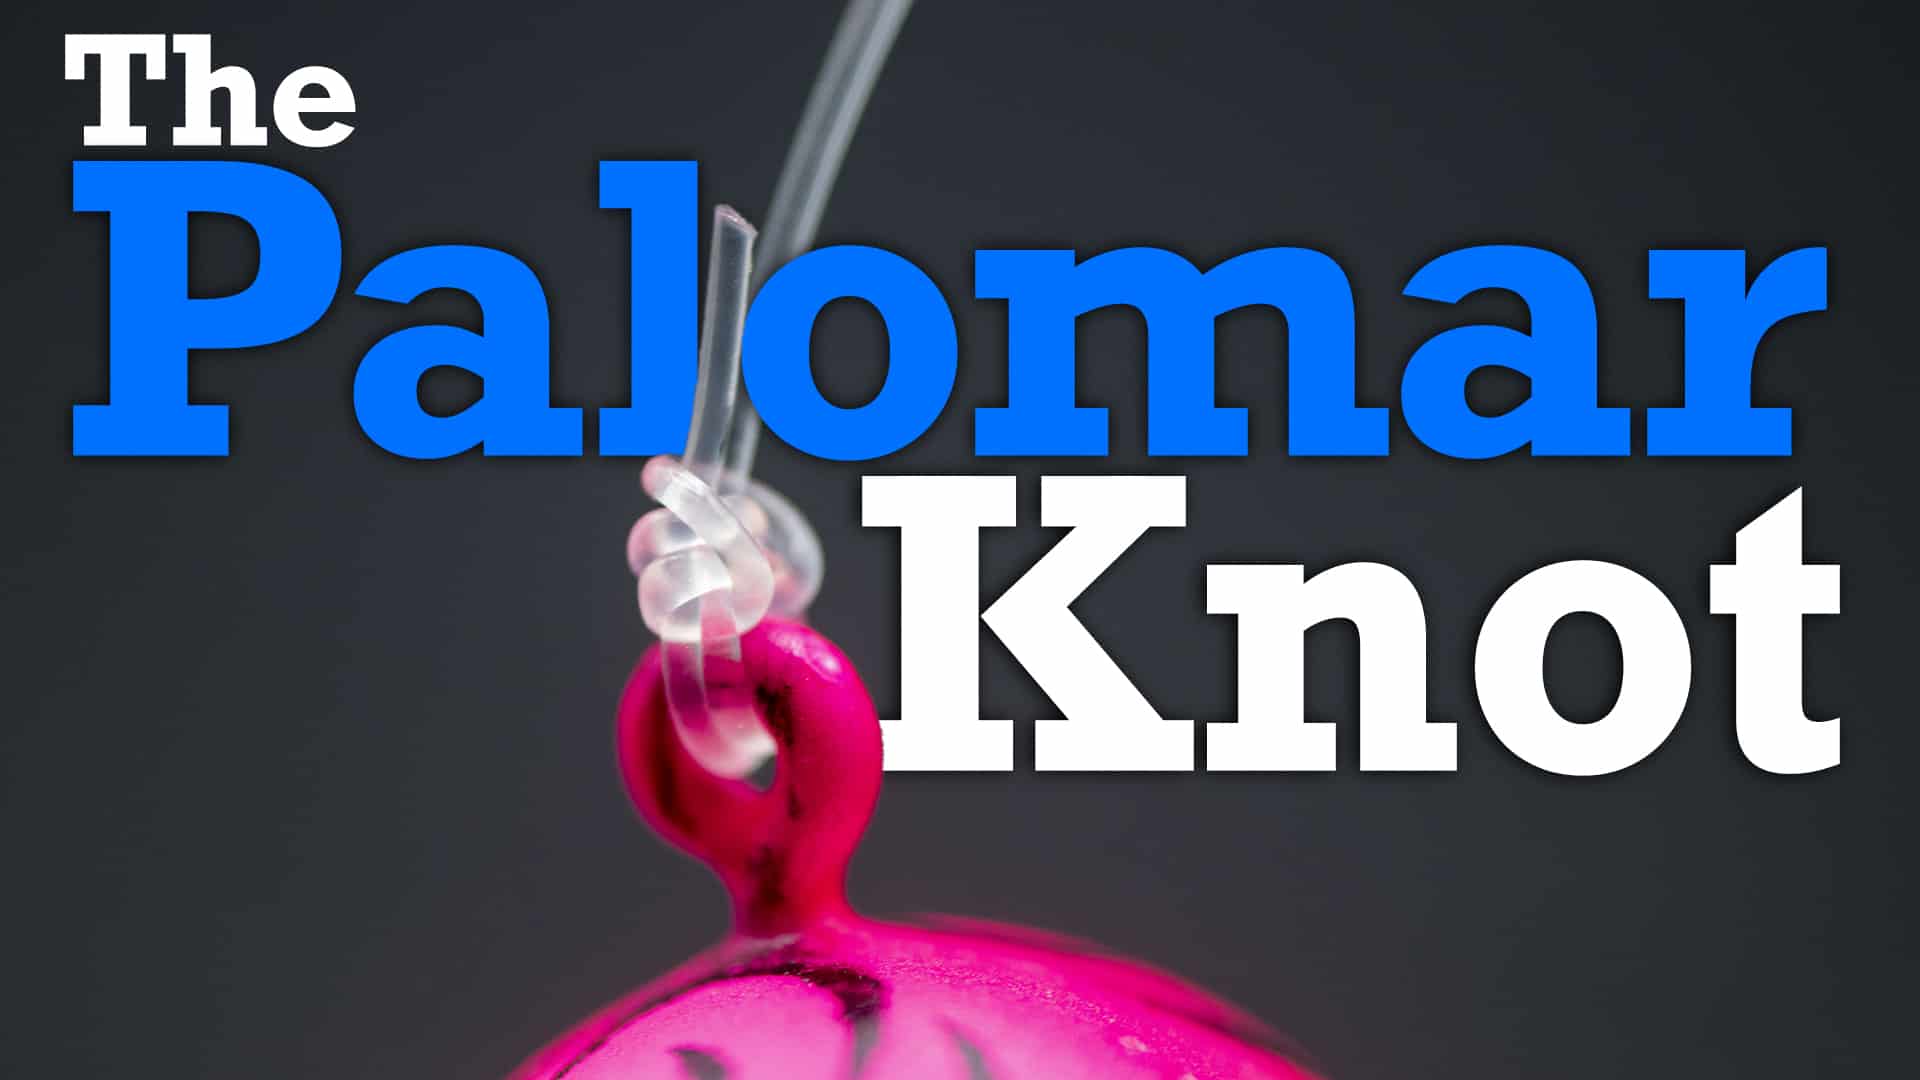 How To Tie A Palomar Knot 